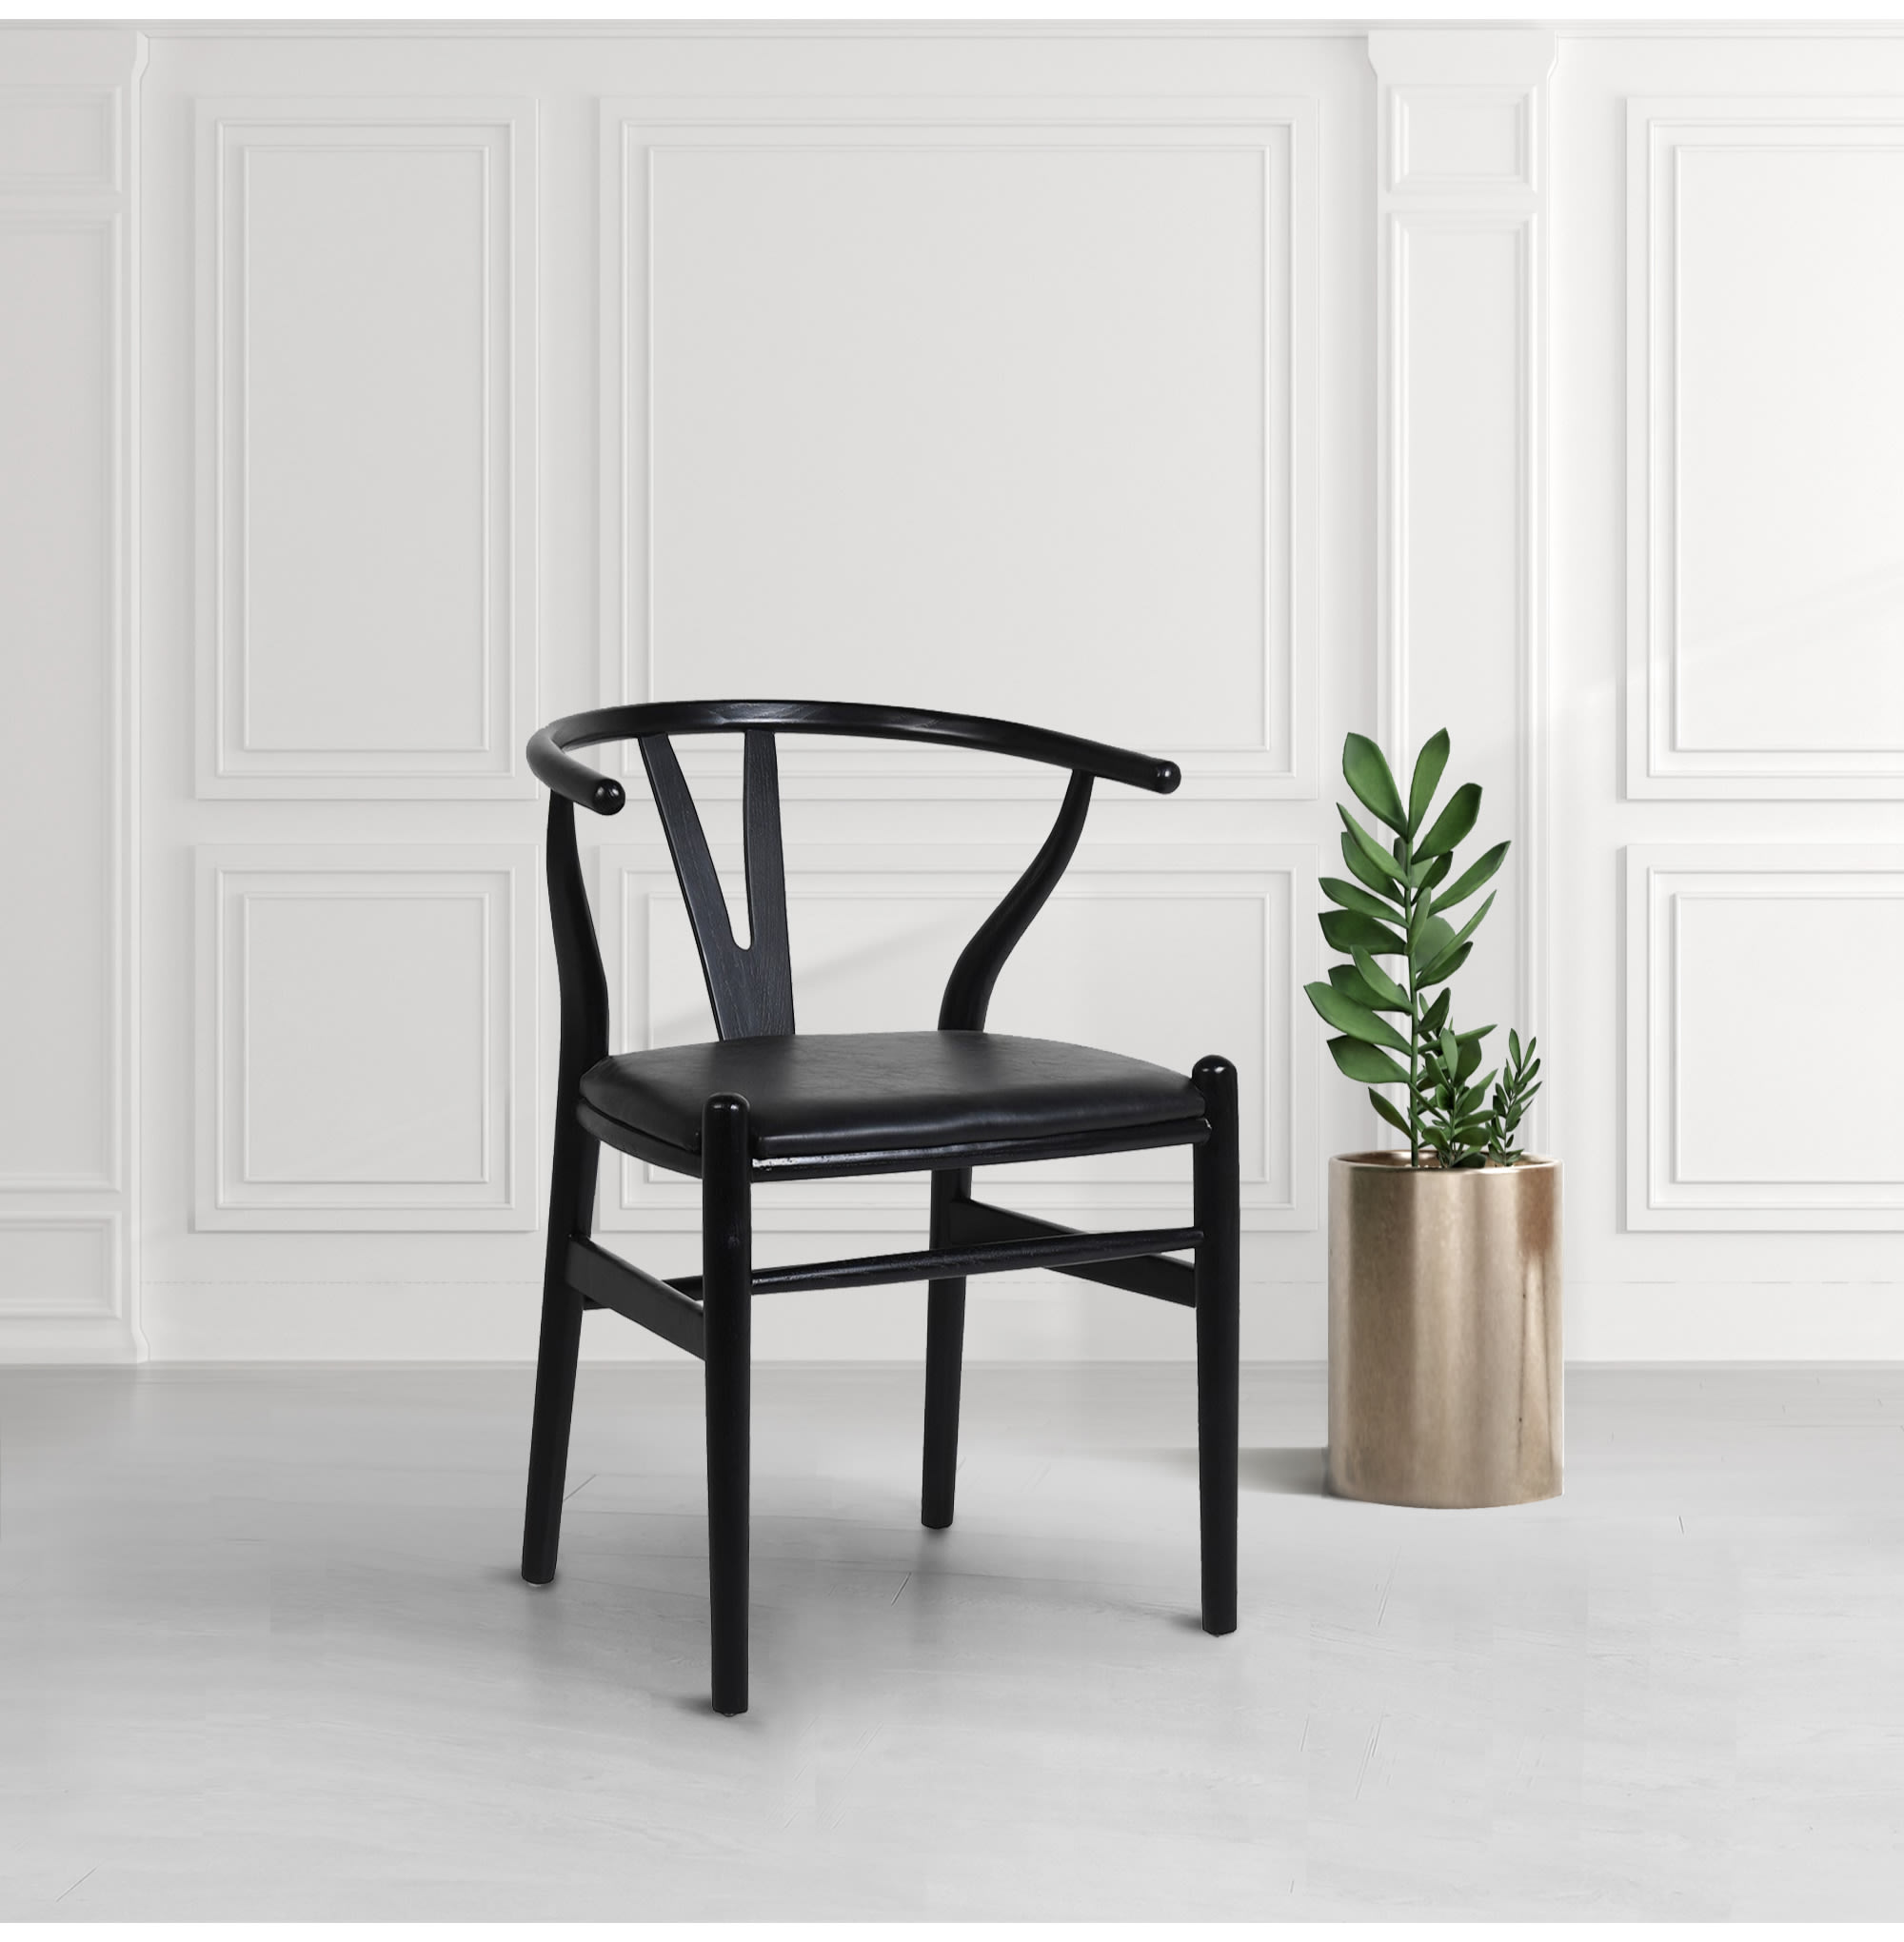 Black Elm Open Back Wooden Dining Chair